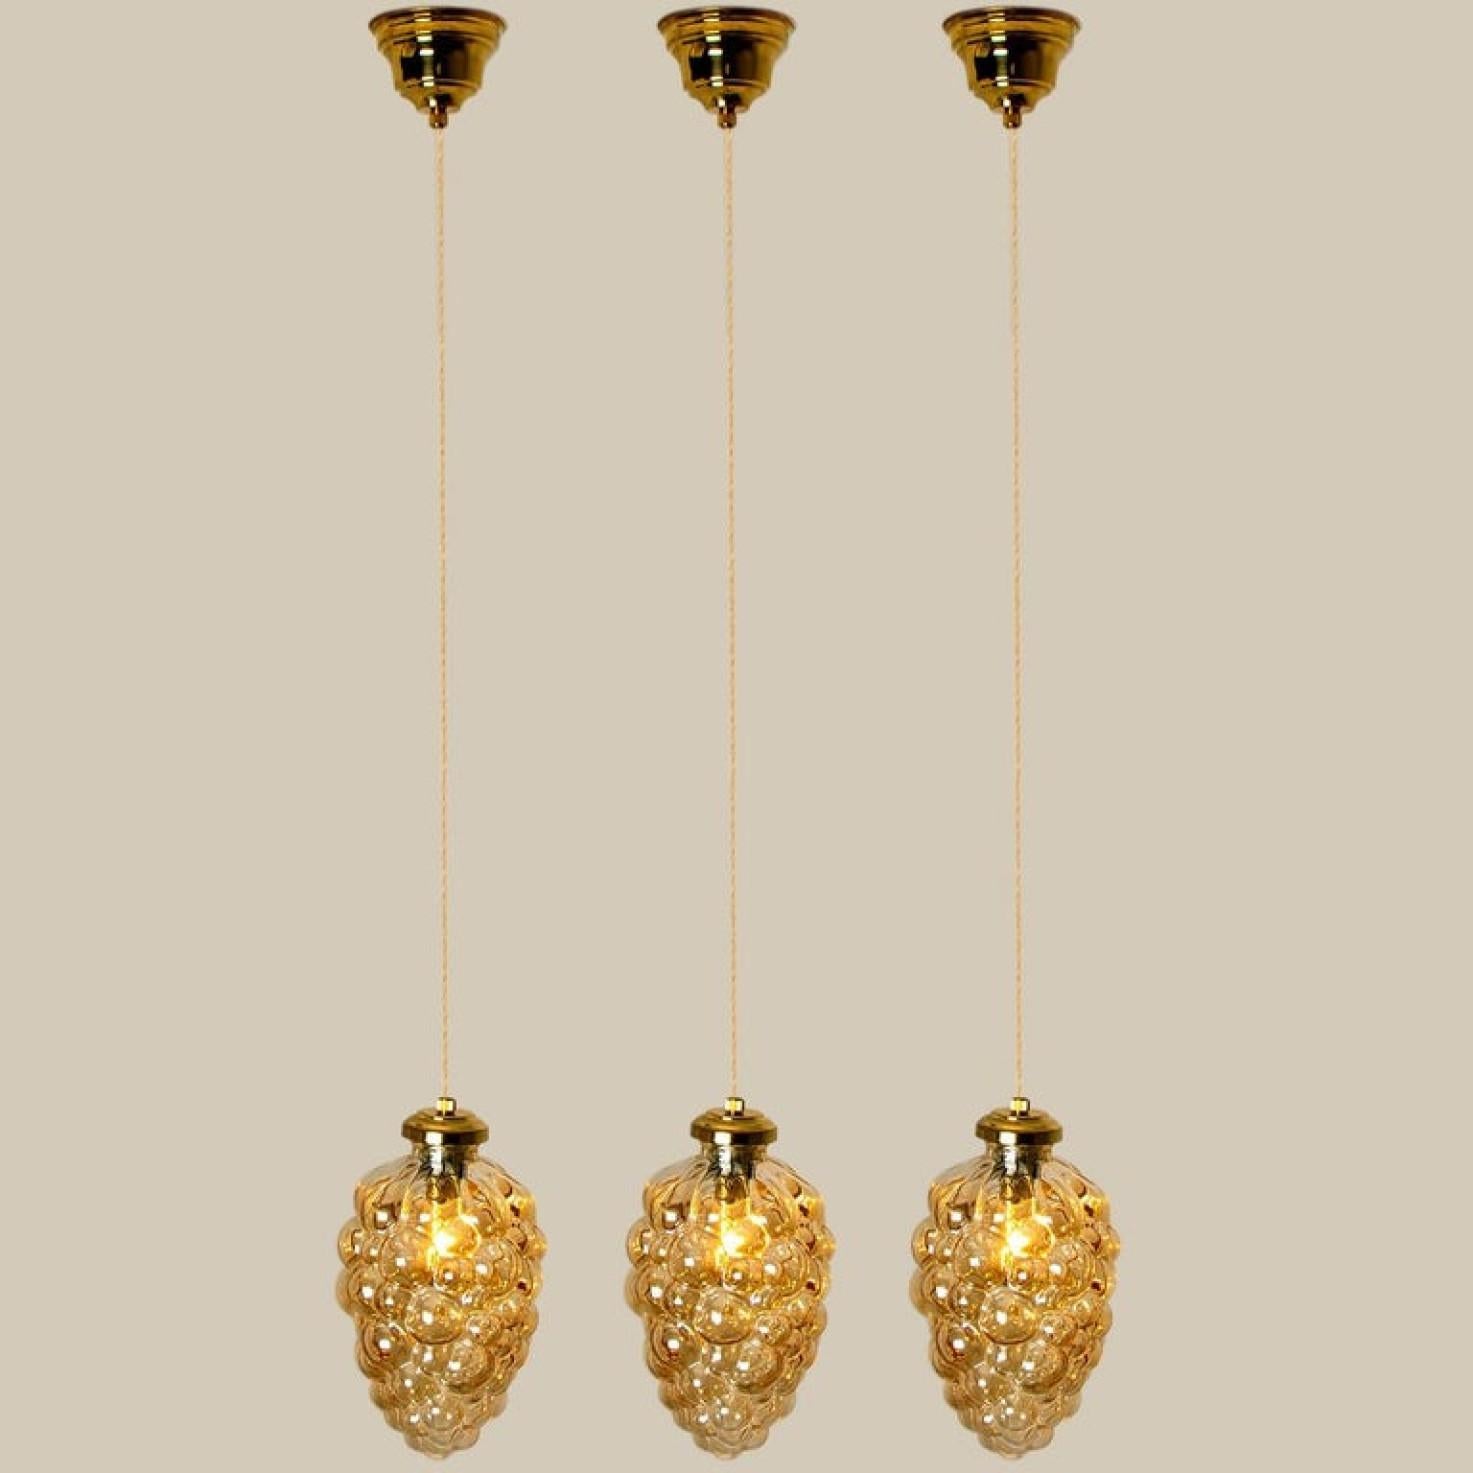 Other Set of 3 of Limburg Tynell Pendant Lights, 1960s For Sale